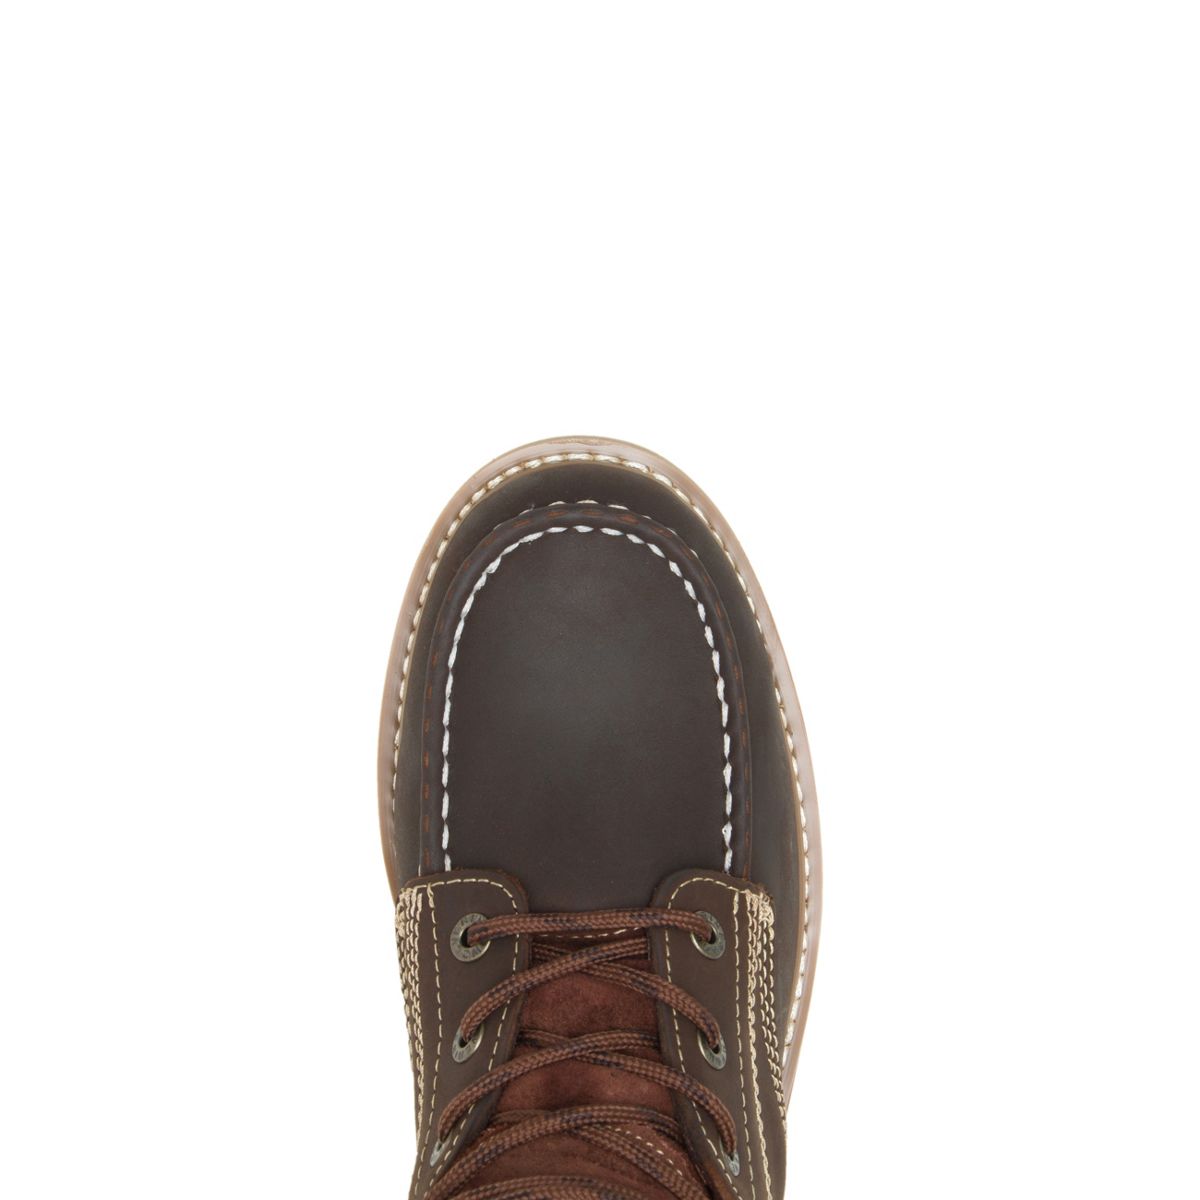 Best rugged moc toe boots for men. 